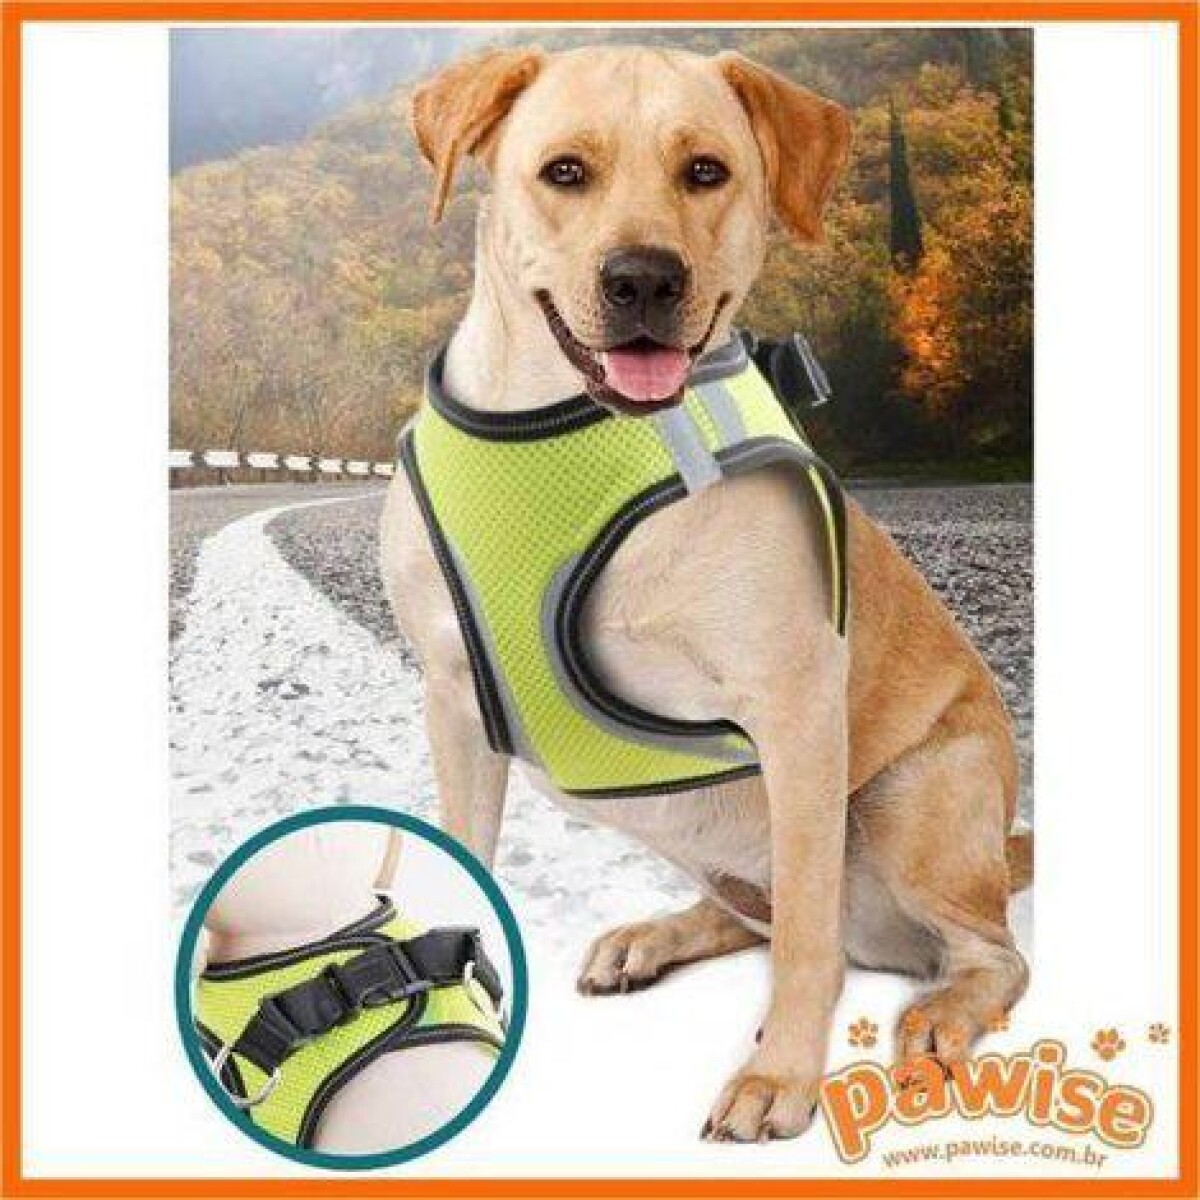 PAWISE - DOGGY SAFETY HARNESS TALLE S - Pawise - Doggy Safety Harness Talle S 